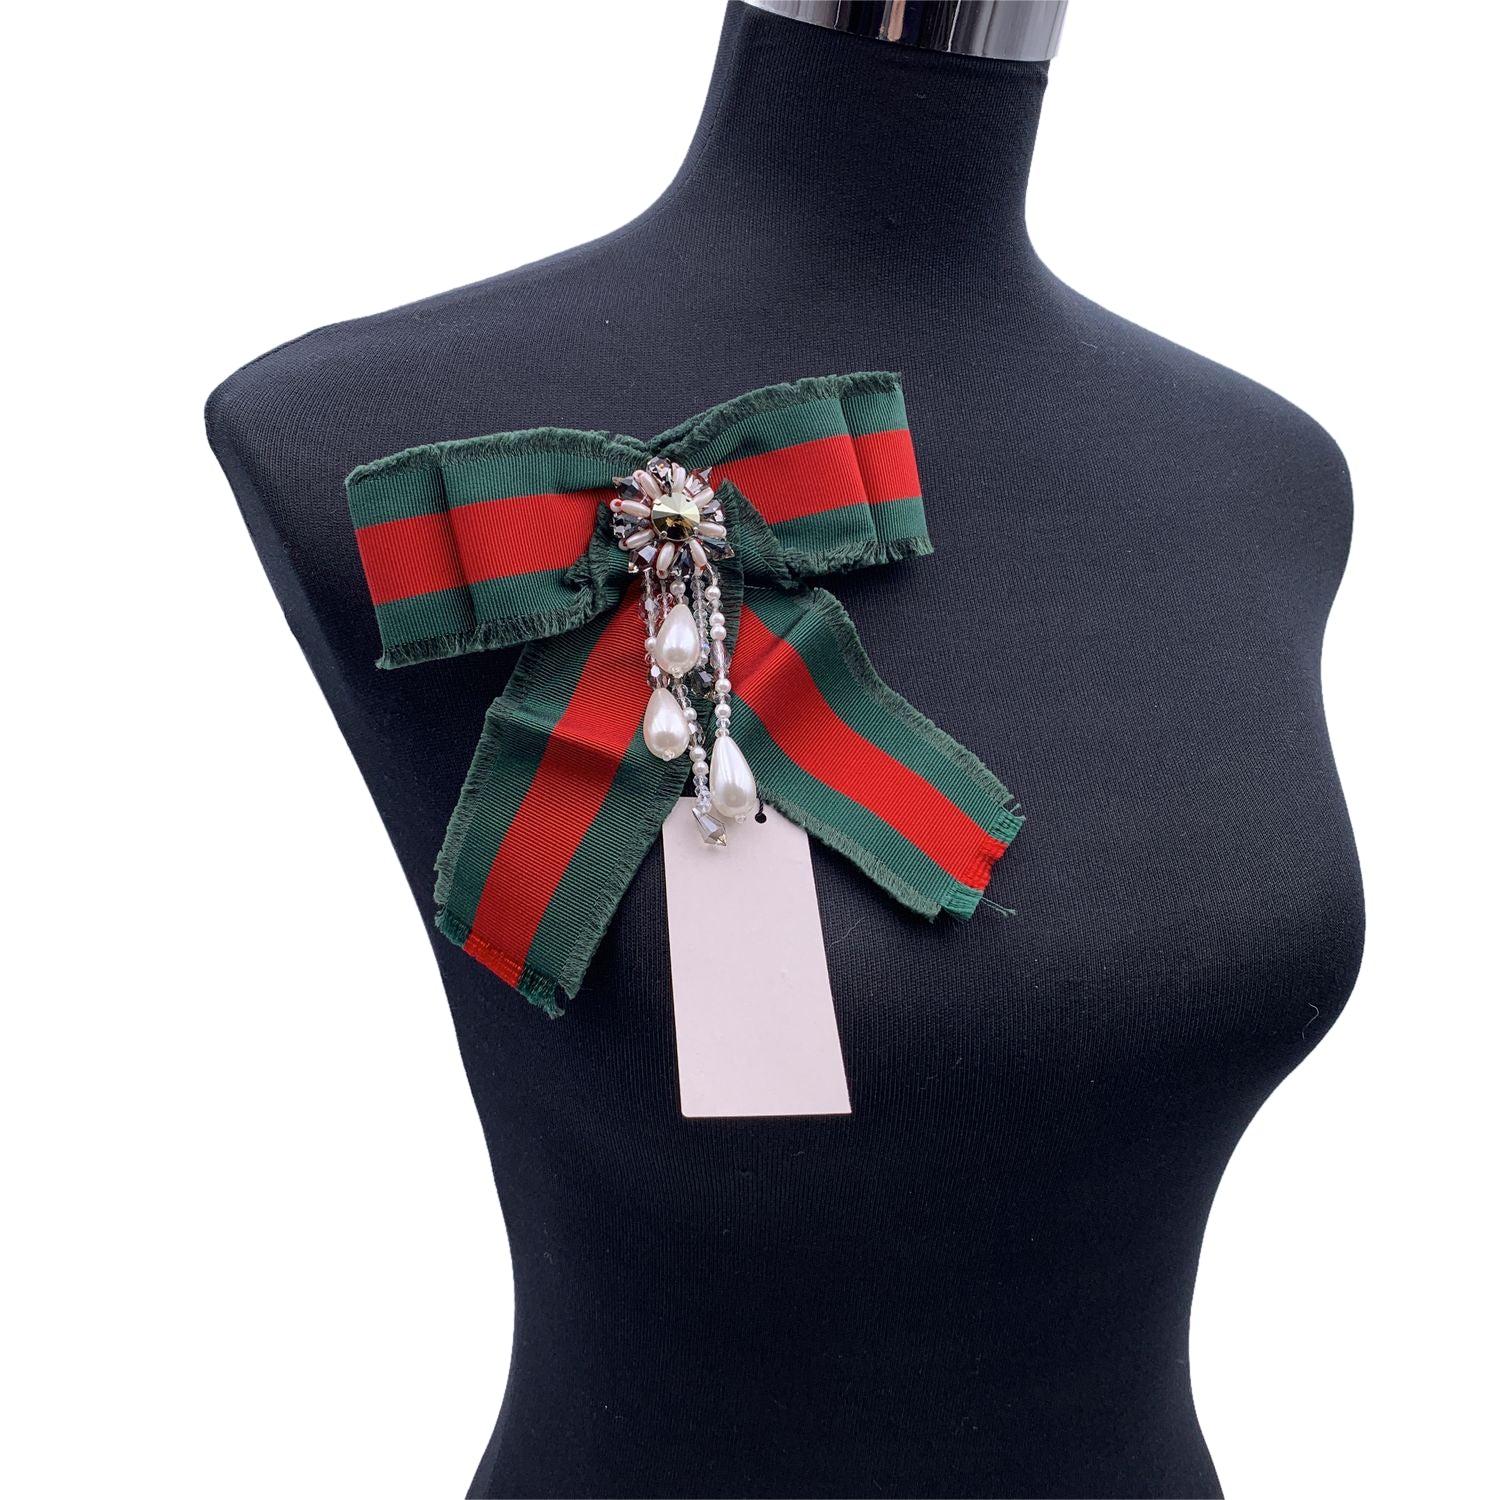 Beautiful Gucci green/red/green striped grosgrain bow brooch. Pearls and rhinestones embellishment on the front.Safety pin closure on the back. Approx. width: 5.5 inches - 14 cm. Approx. height: 6 inches - 15.2 cm. Signed 'Gucci' on back. Condition